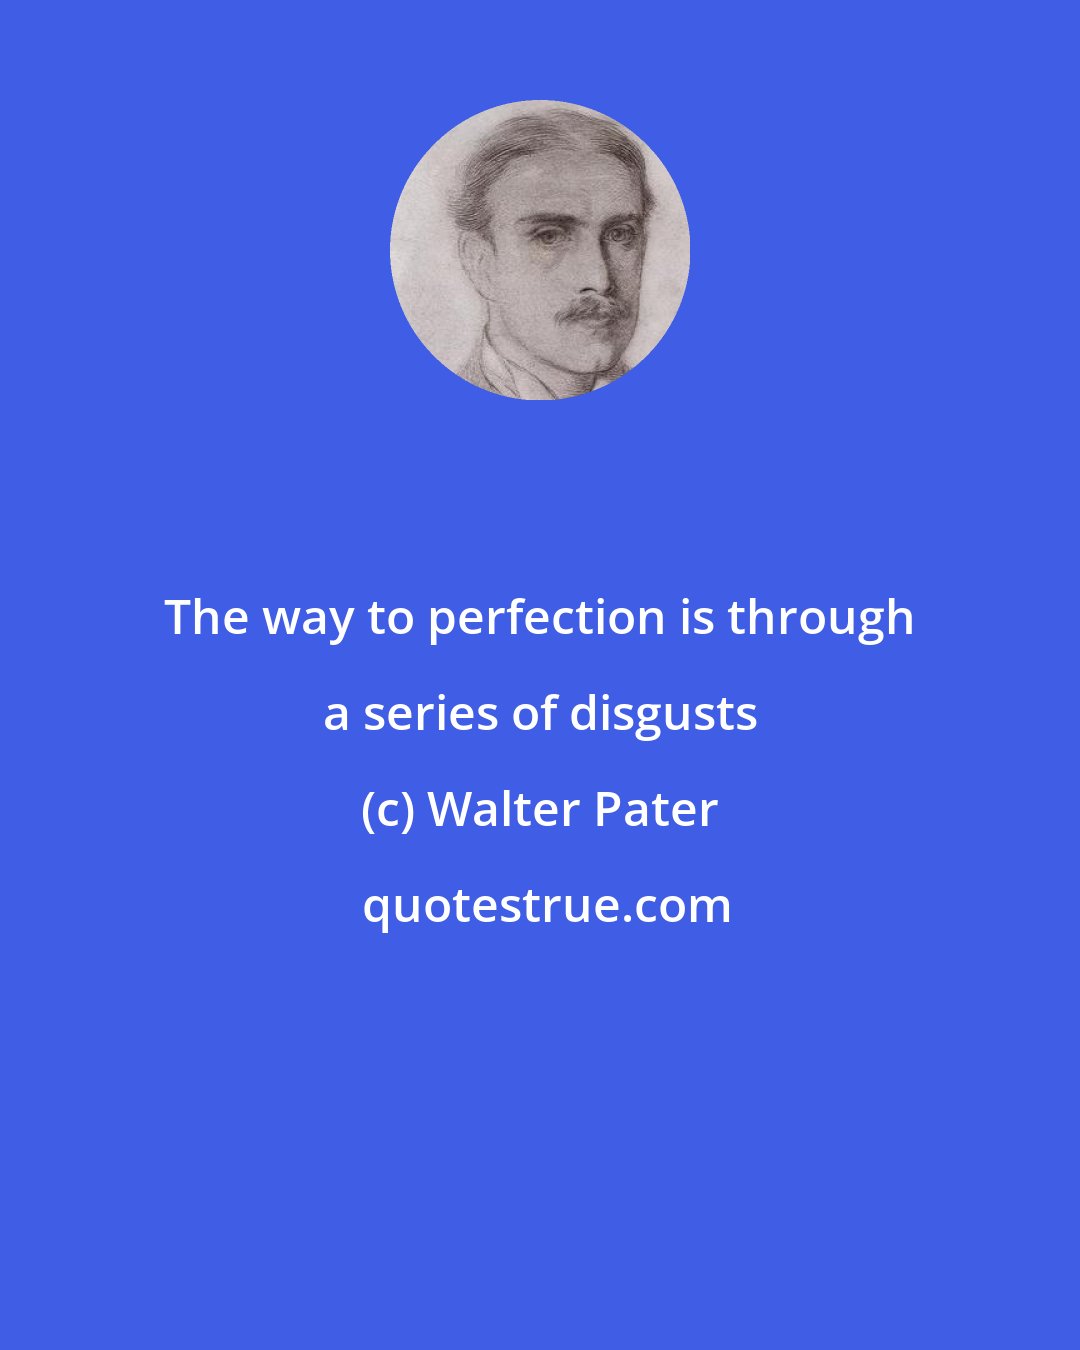 Walter Pater: The way to perfection is through a series of disgusts